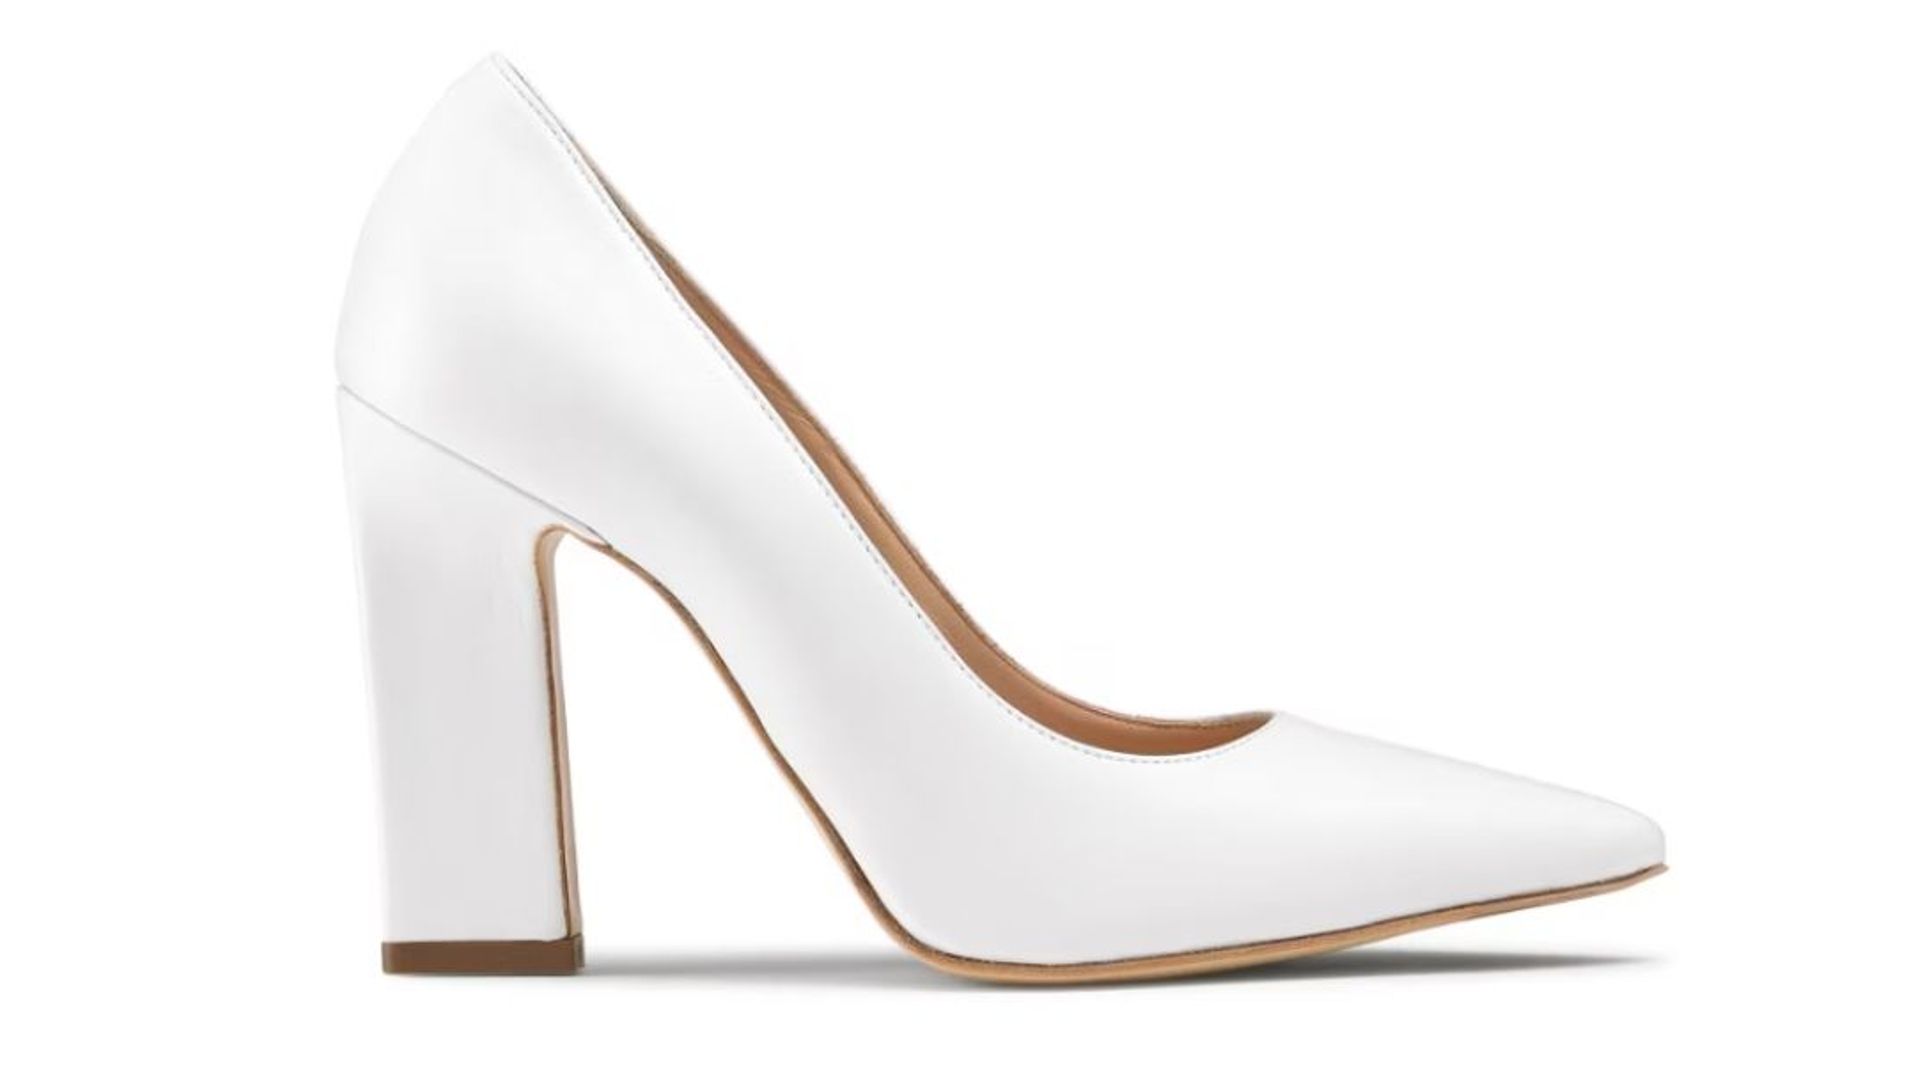  100Point Blade Heel Court Shoes - Russell & Bromley 